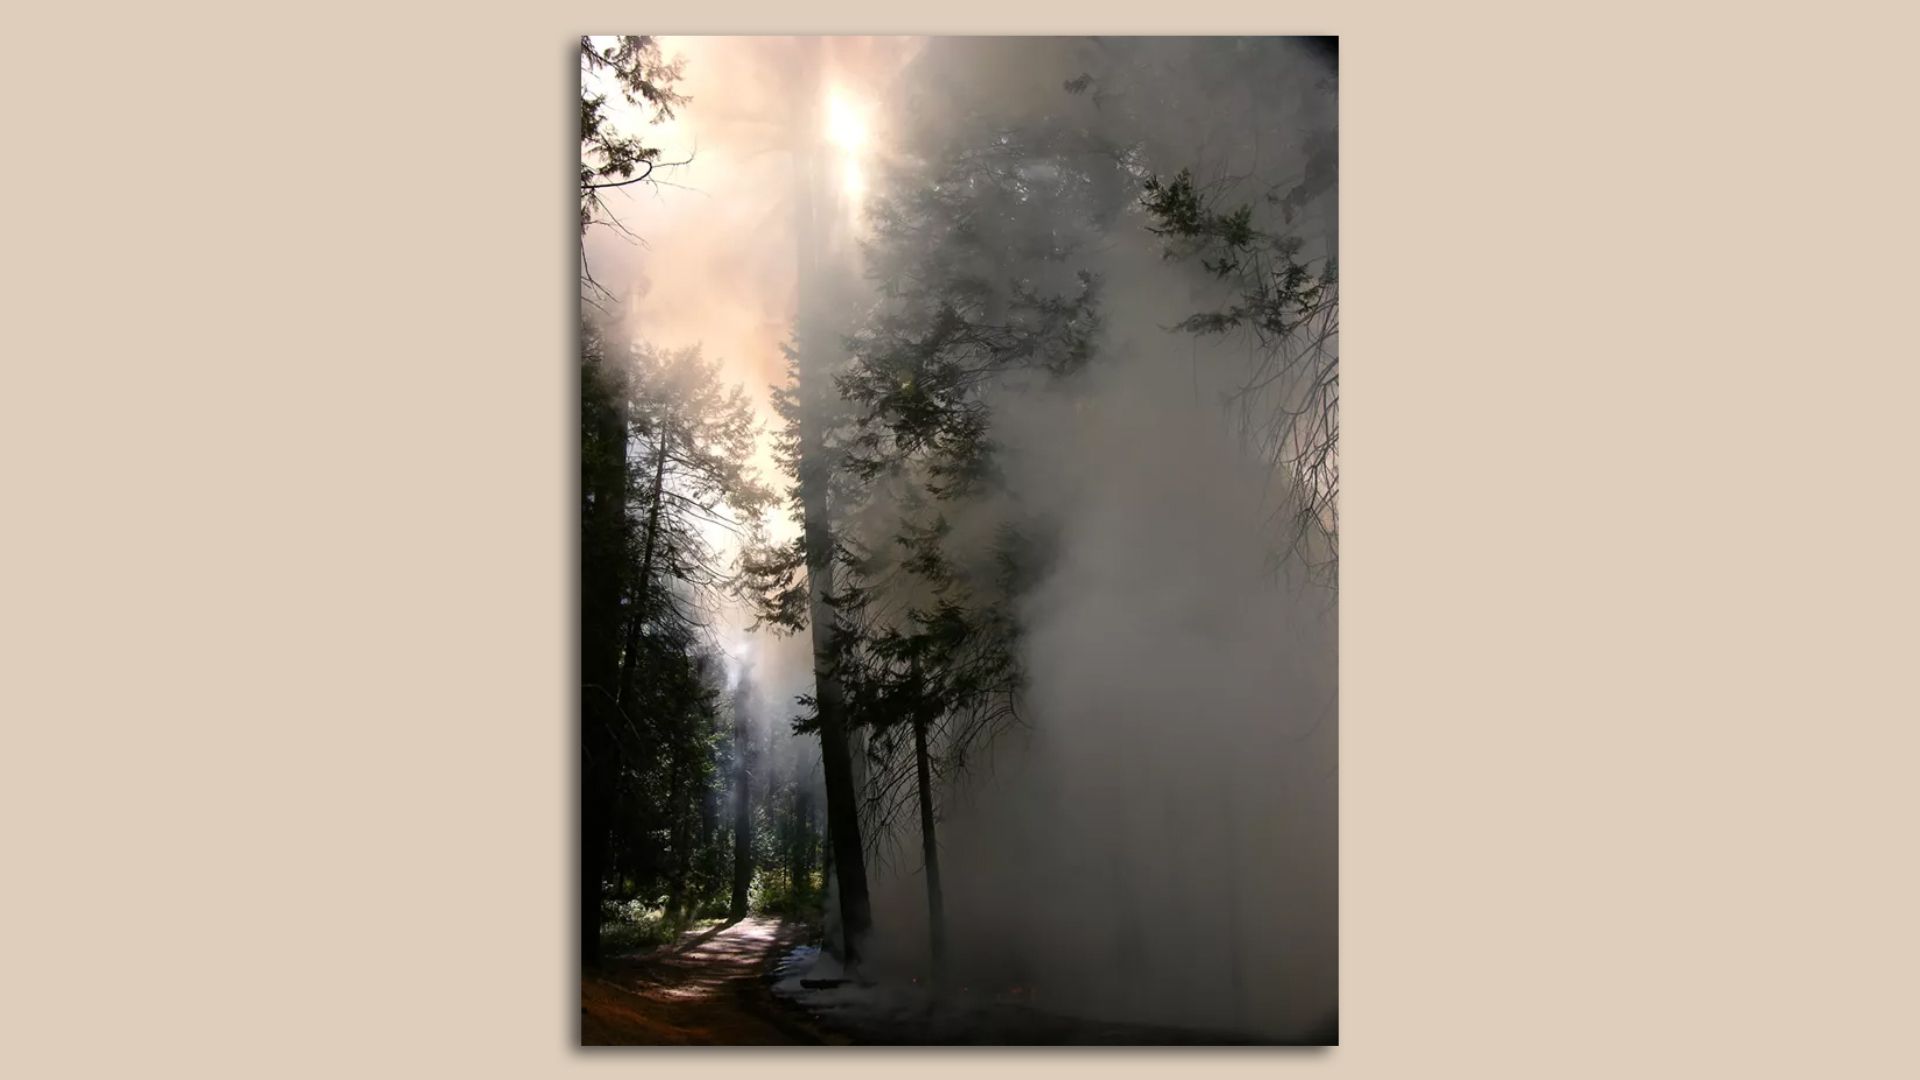 A plume of wildfire smoke in a forest. 